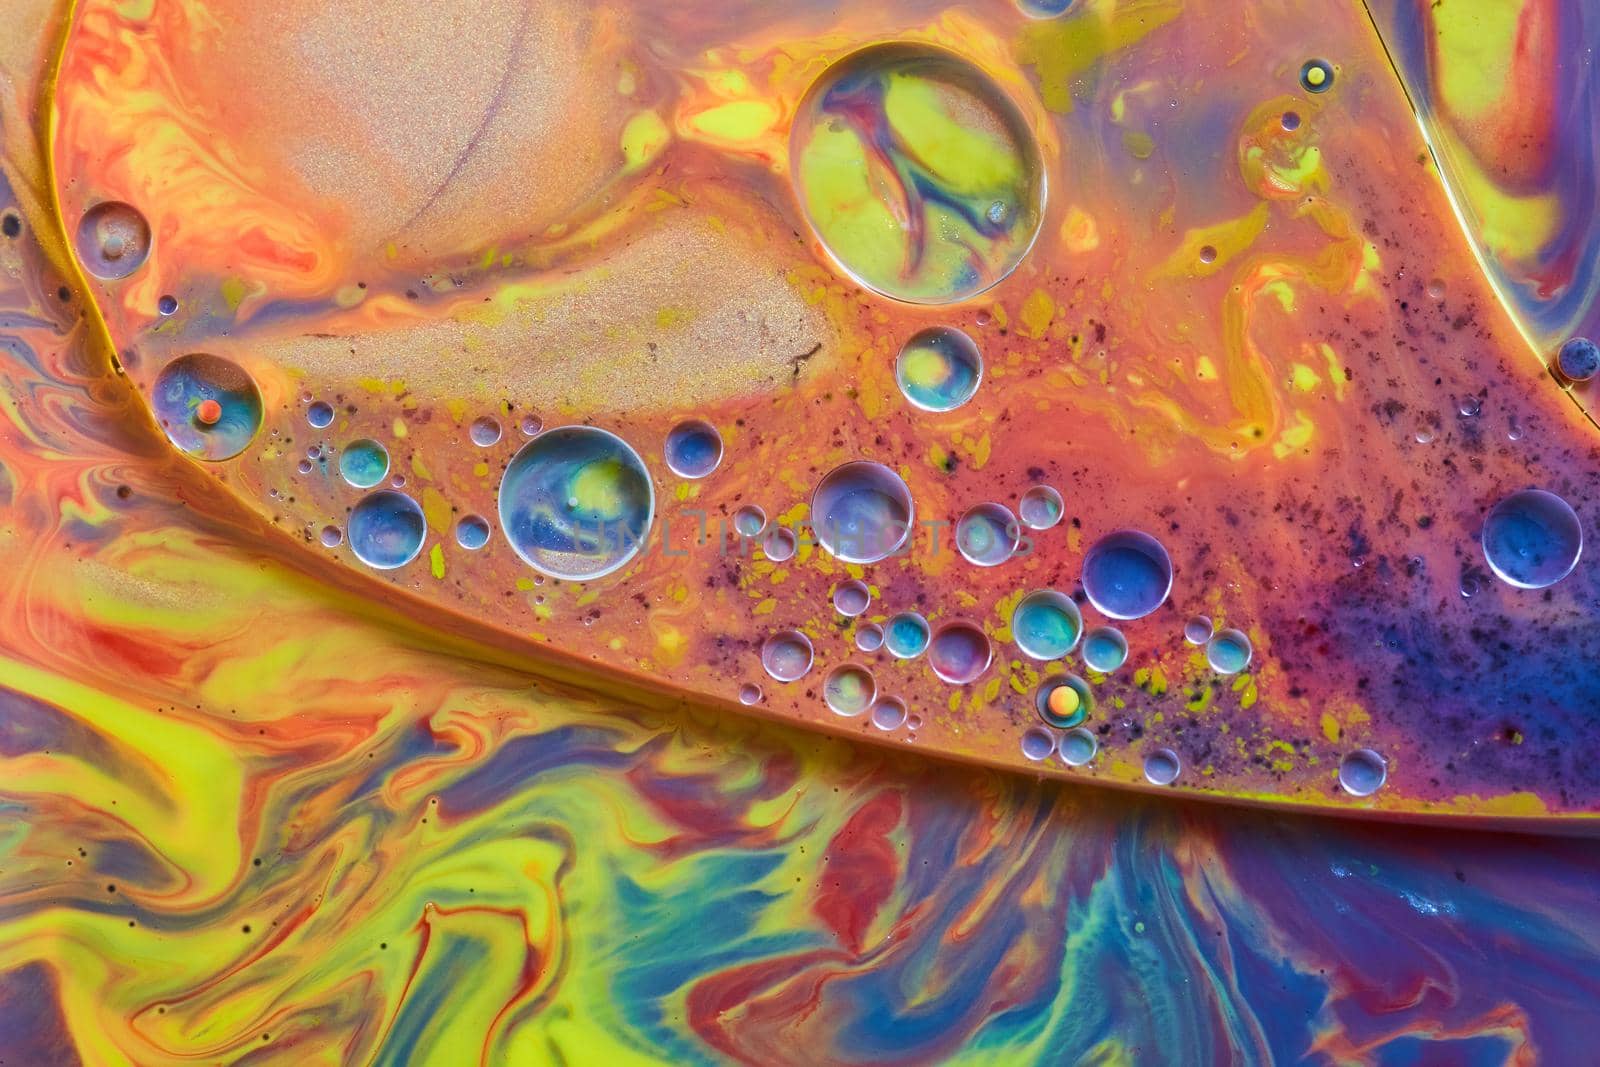 Mysterious liquid of rainbow colors and small shiny spheres by njproductions